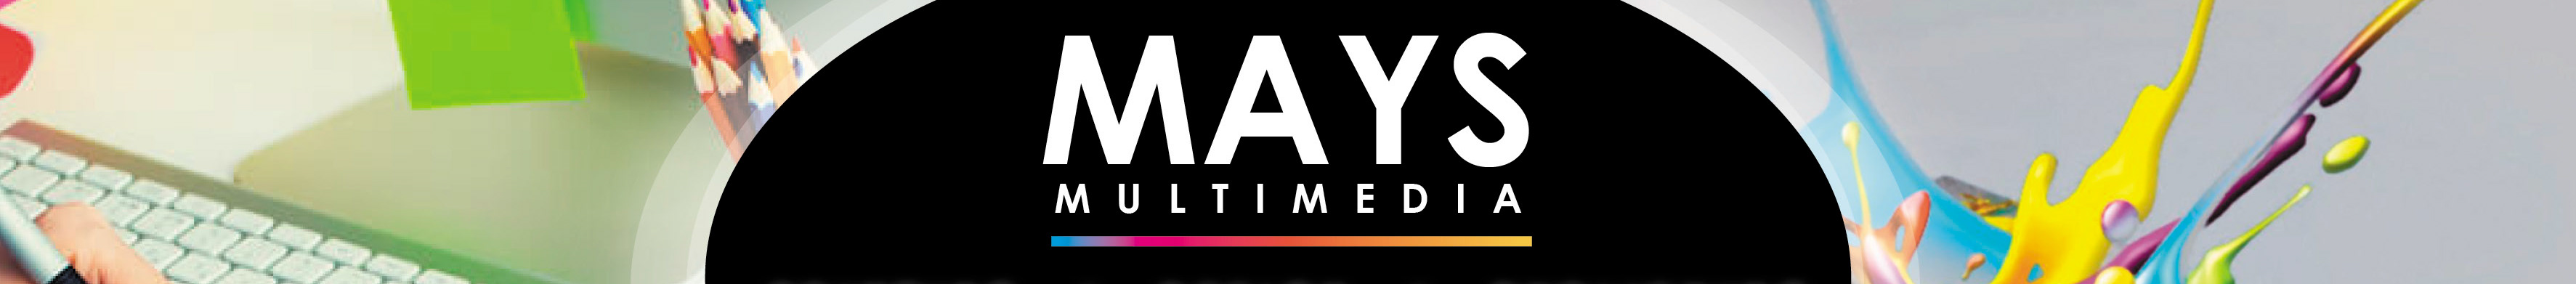 MAYS MultImedia's profile banner